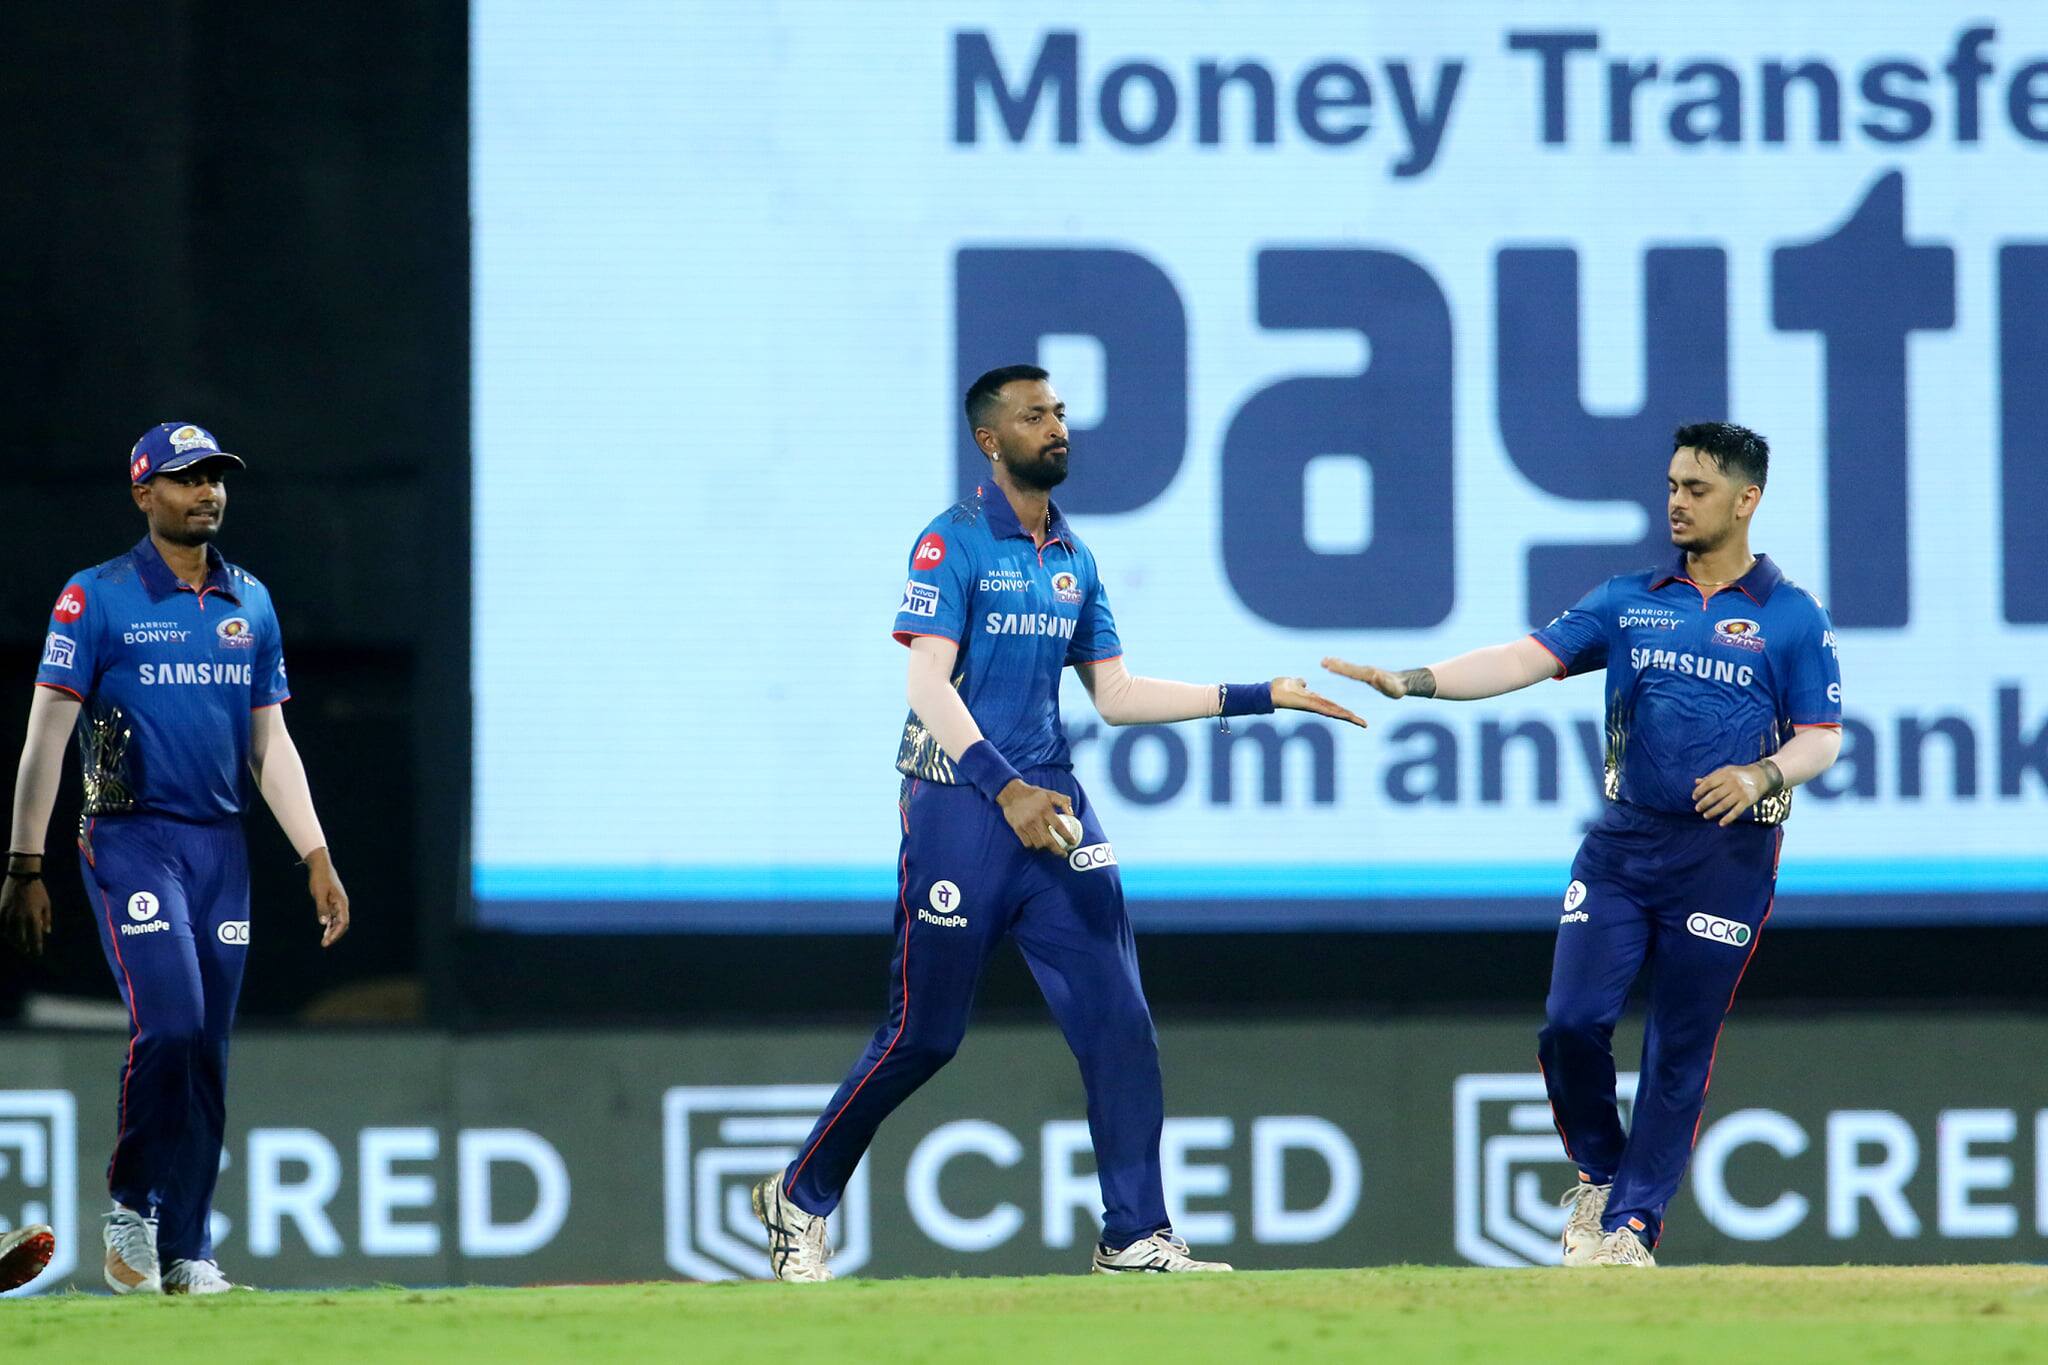 Mumbai Indians all-rounder Krunal Pandya after taking the catch of Delhi Capitals skipper Rishabh Pant in their IPL 2021 match in Chennai. (Photo: IPL)